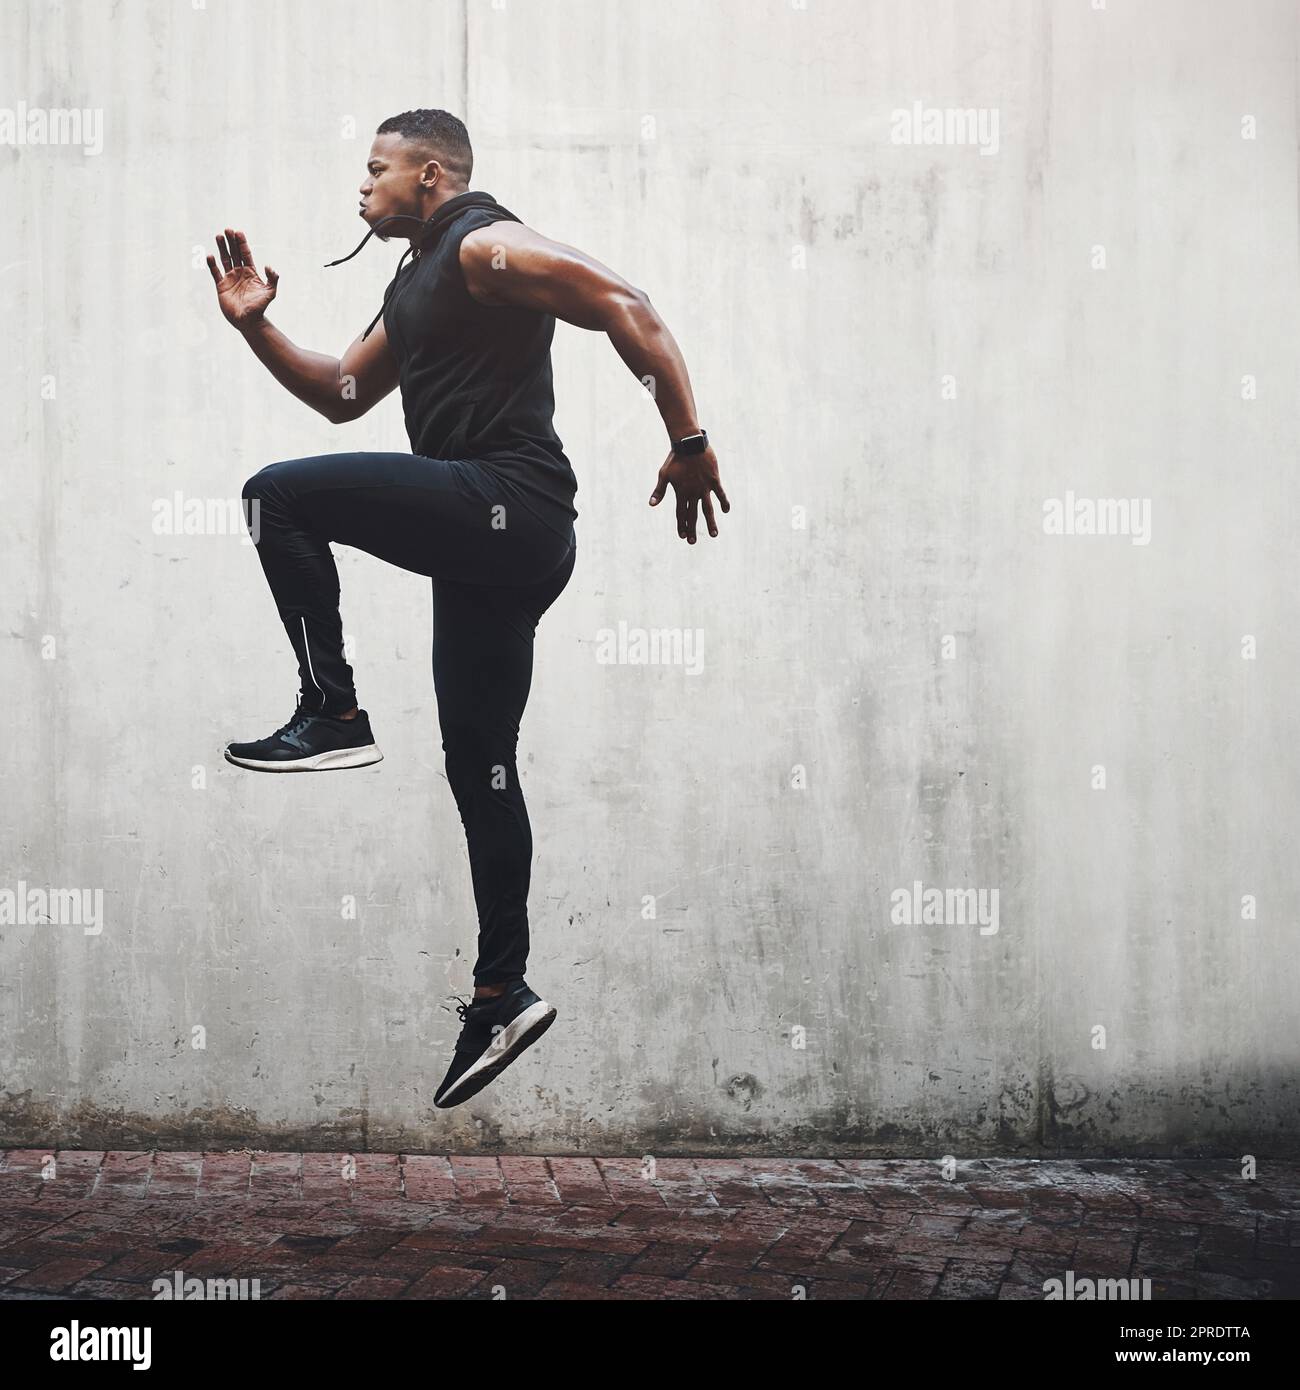 Getting into a nice rhythm. Full length shot of a handsome young man skipping on the spot while exercising outside. Stock Photo